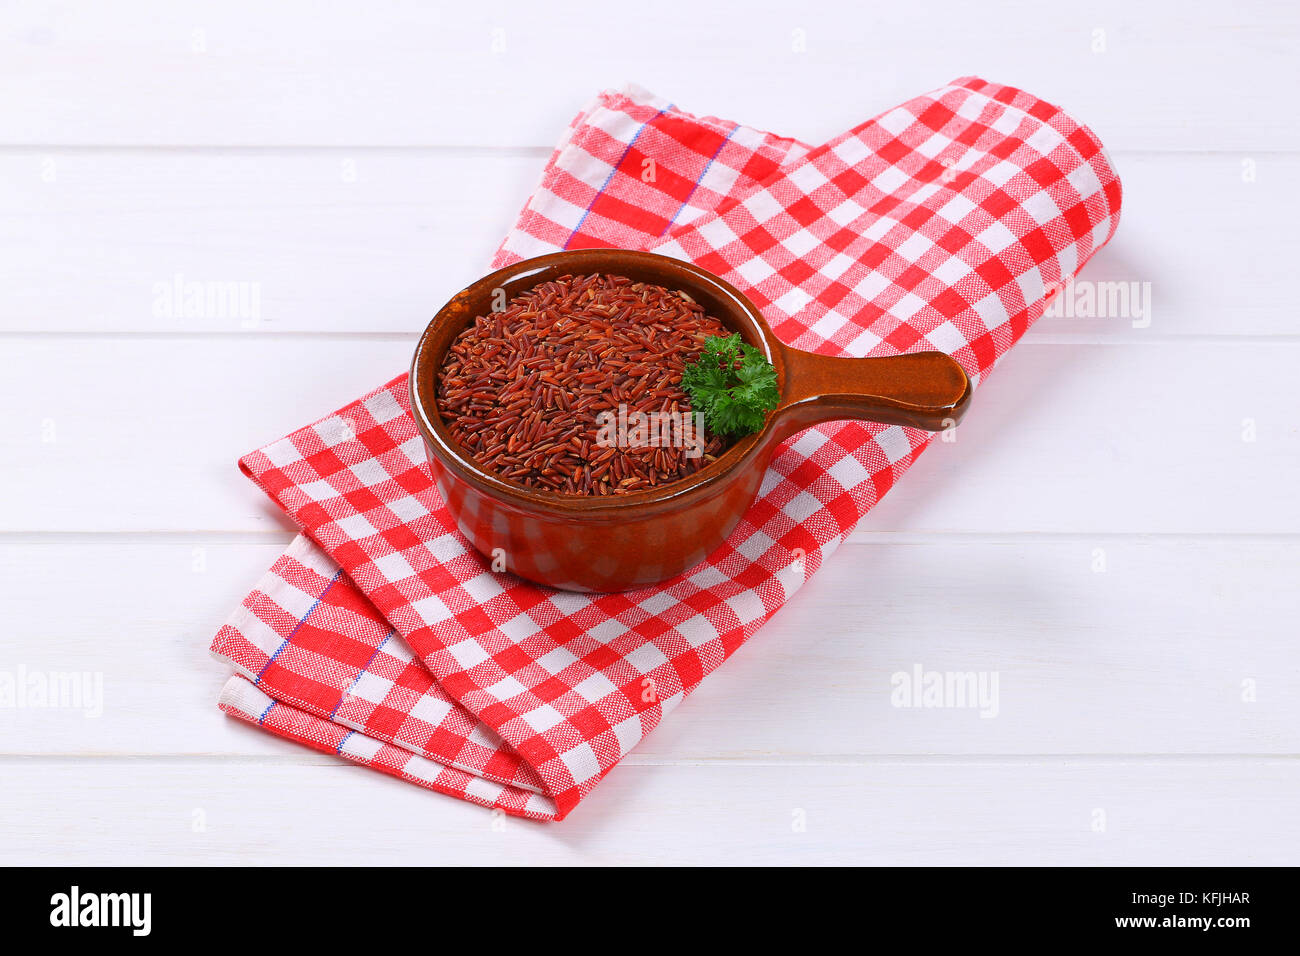 saucepan of red rice on checkered place mat Stock Photo